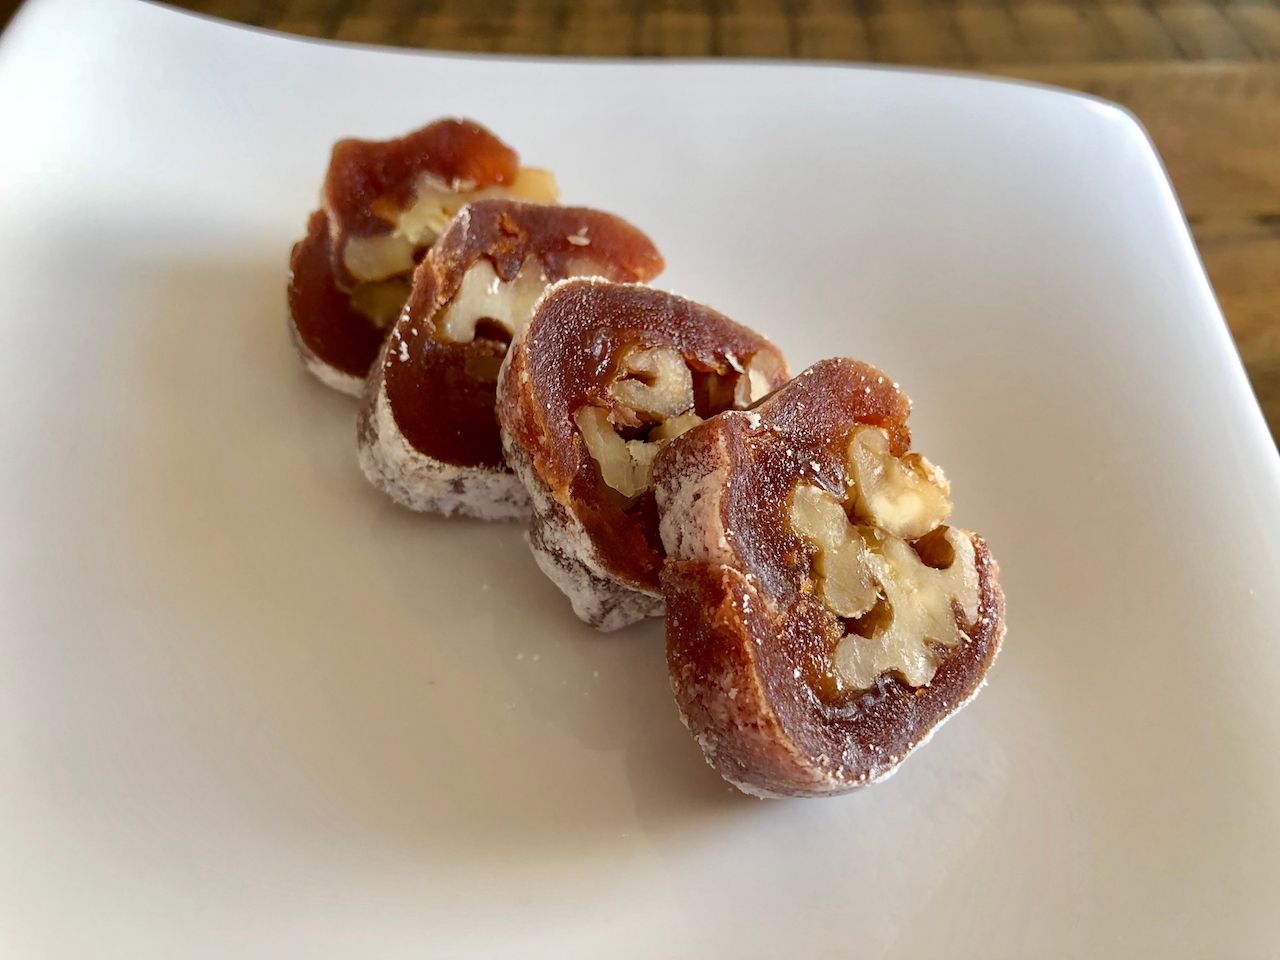 Walnuts wrapped in persimmons